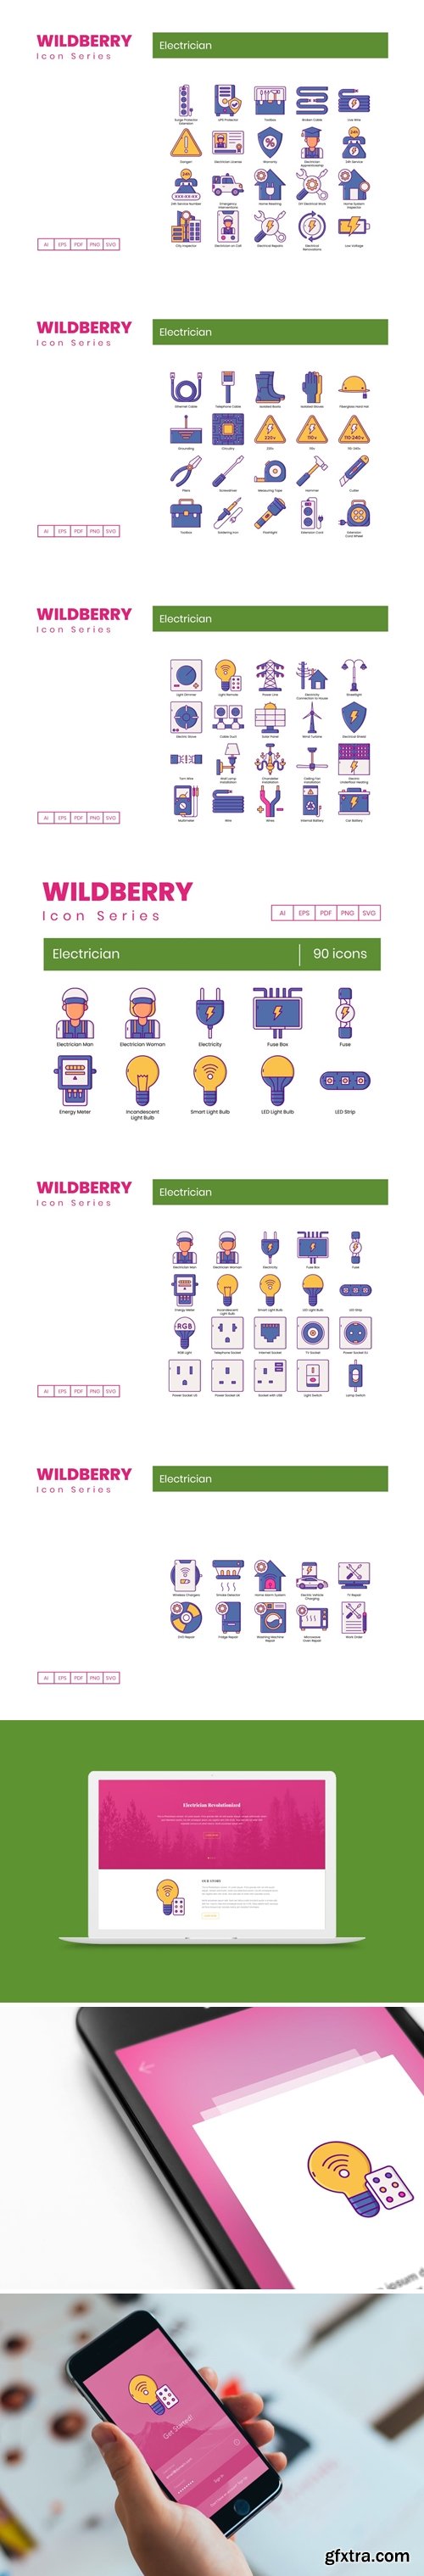 90 Electrician Icons | Wildberry Series